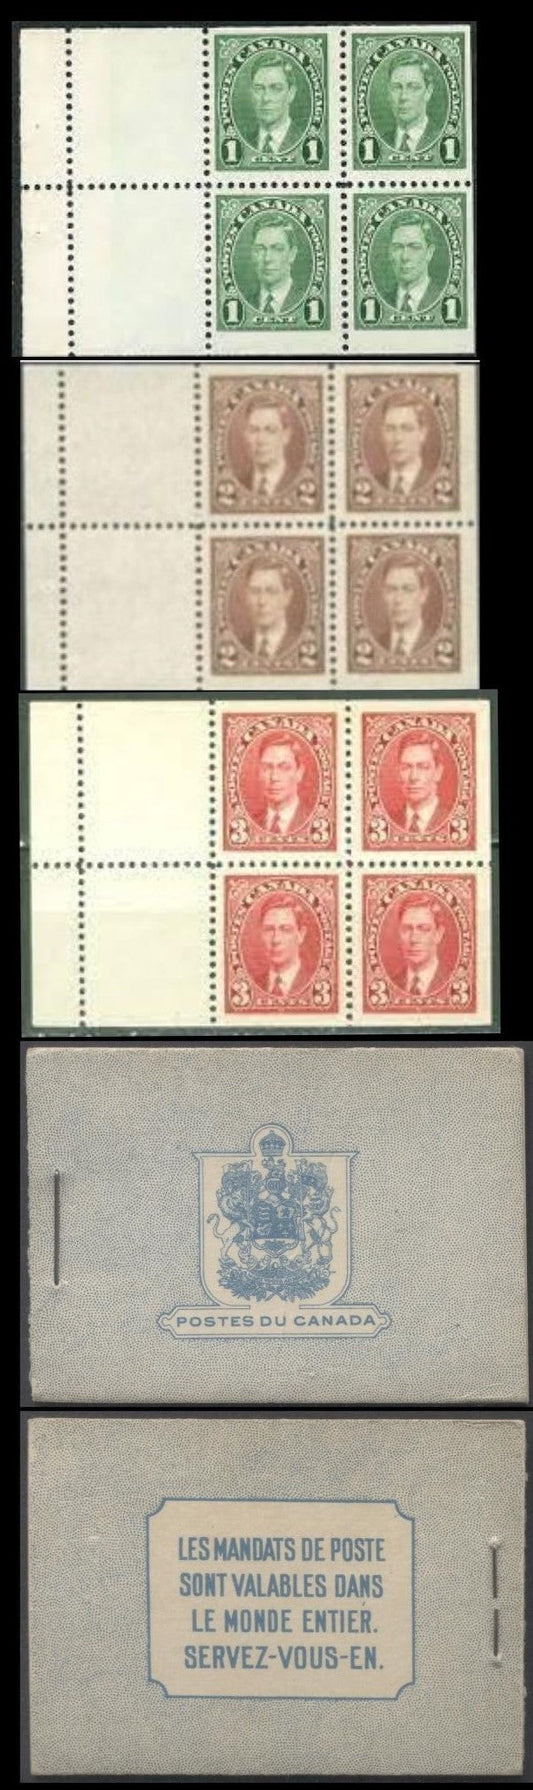 Lot 82 Canada #BK31bF 1937-1942 Mufti Issue, A Complete 25c French Booklet, No Rate Page, 3 Panes Of 4 Of 1c Green, 2c Brown & 3c Dark Carmine, Horizontal Ribbed Paper, Front Cover Ib, Back Cover B, Type I Covers, Fine, Only 227,474 Issued